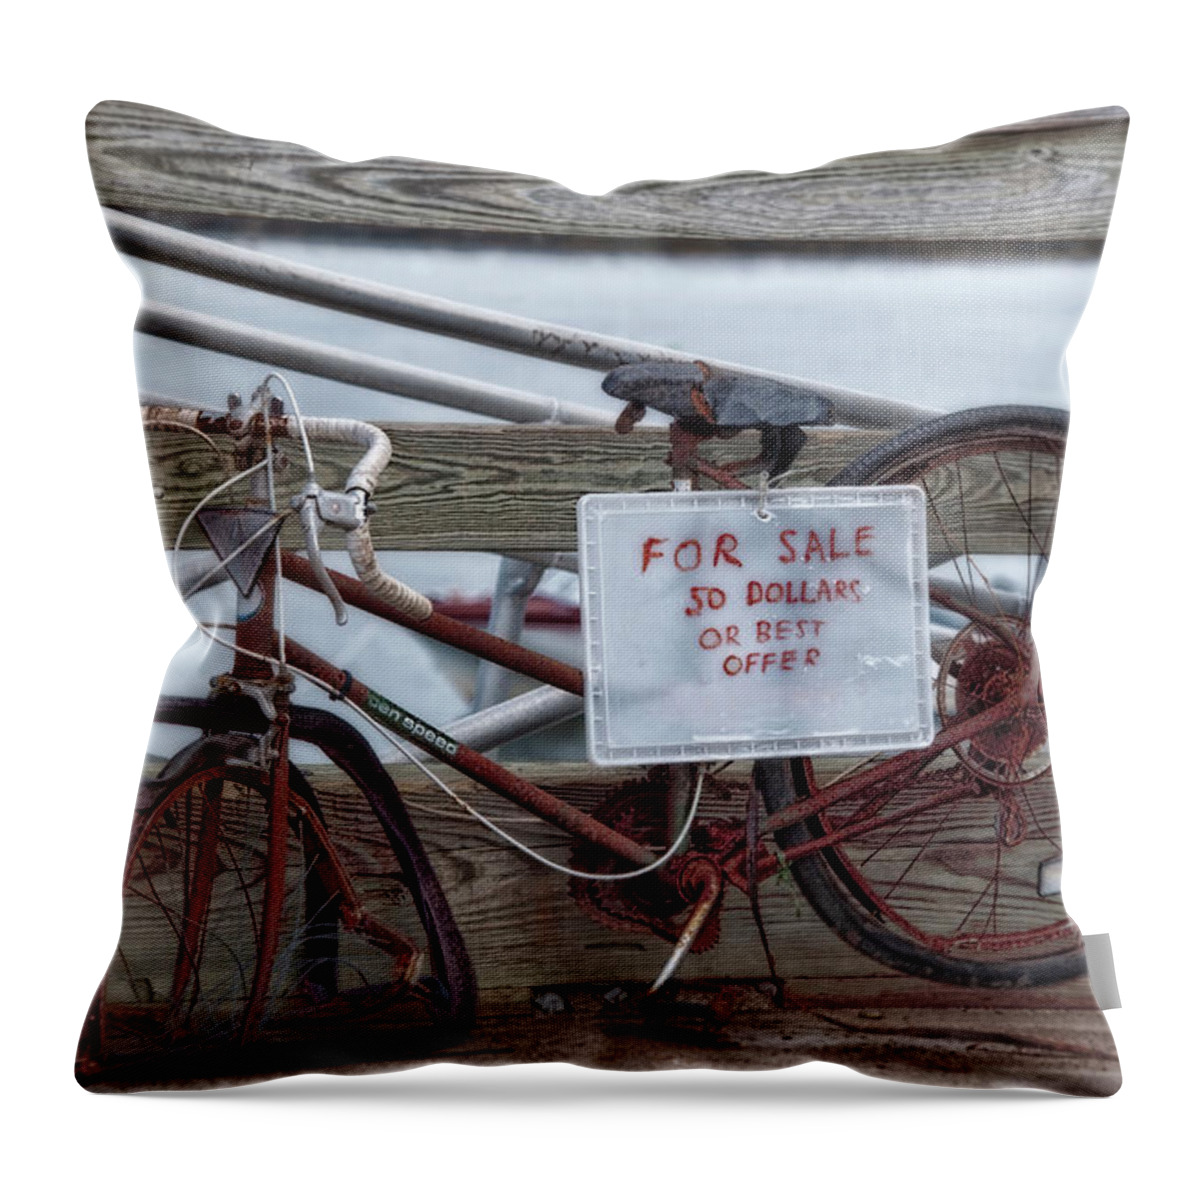 Bicycle Throw Pillow featuring the photograph Bicycle For Sale #2 by Richard Bean